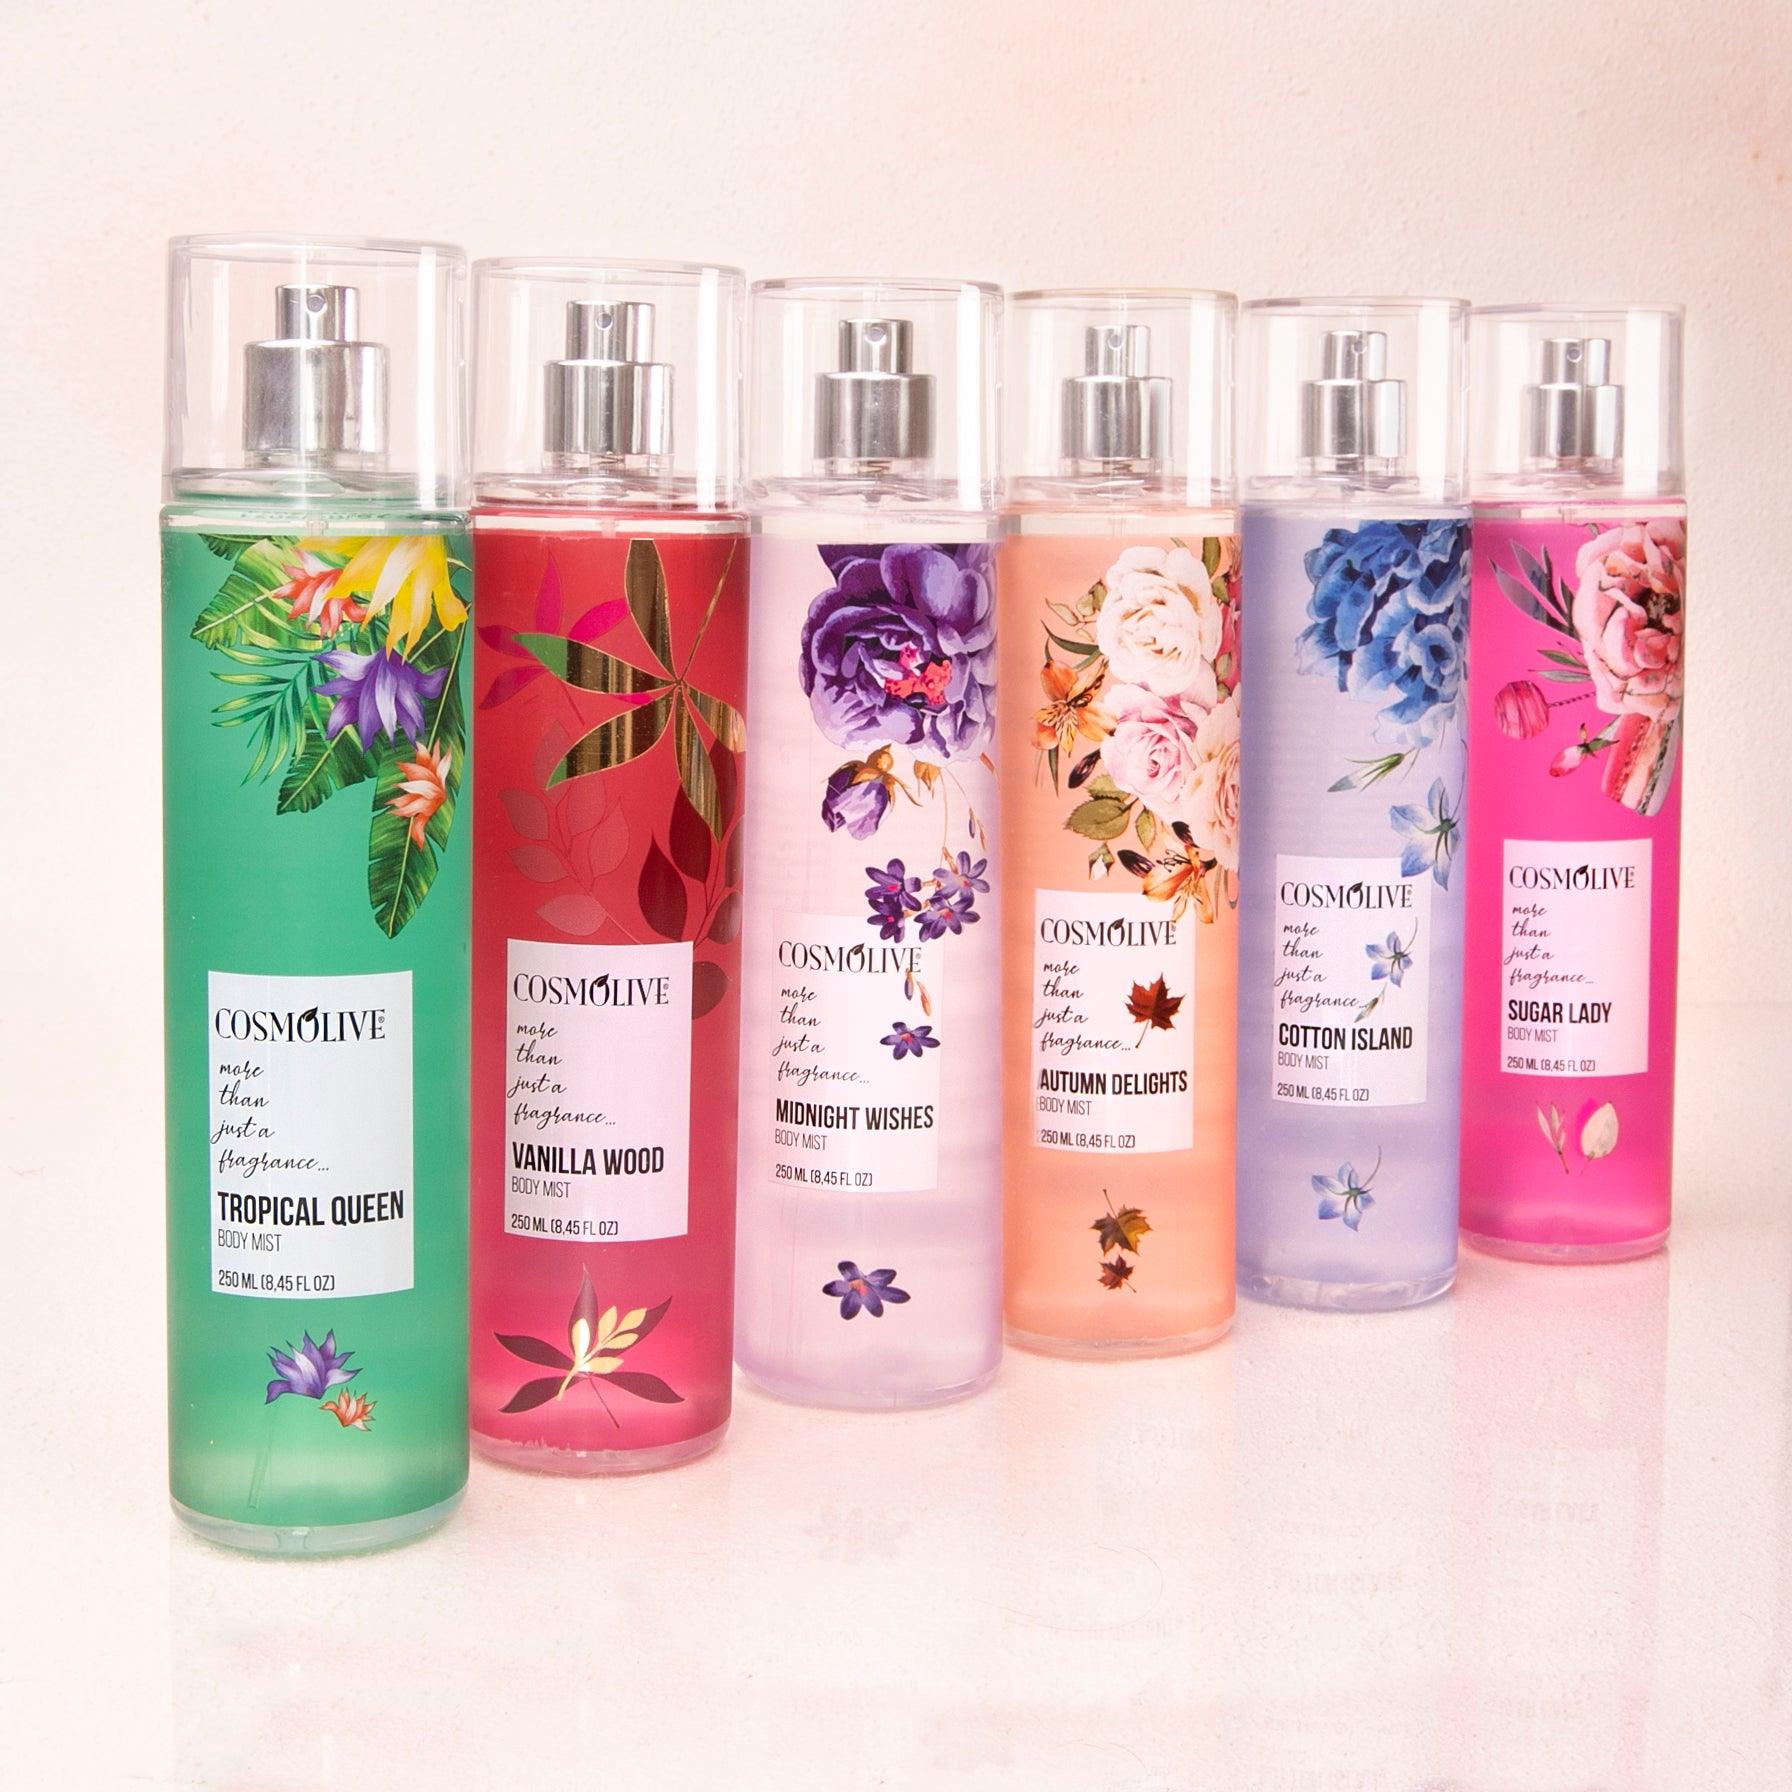 COSMOLIVE BODY MIST 250 ml Cotton Island / The Excellent Composition of Nature With The Fruit and Floral Essences / Natural Life